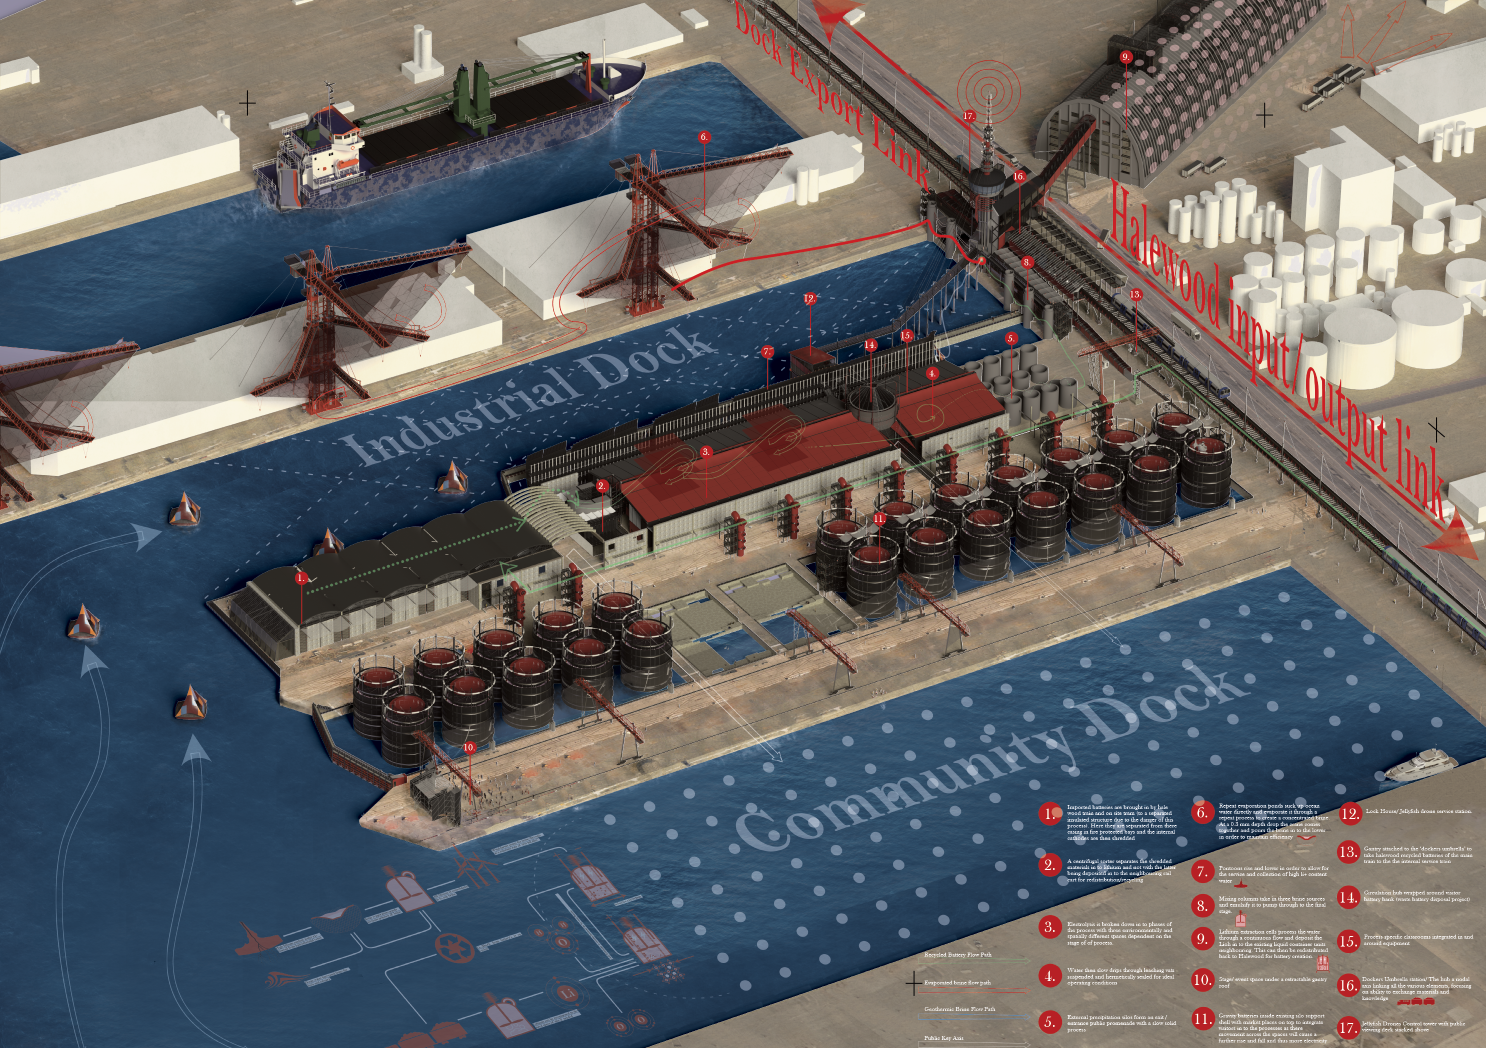 Master Axo depiction of the industrial and commercial dock